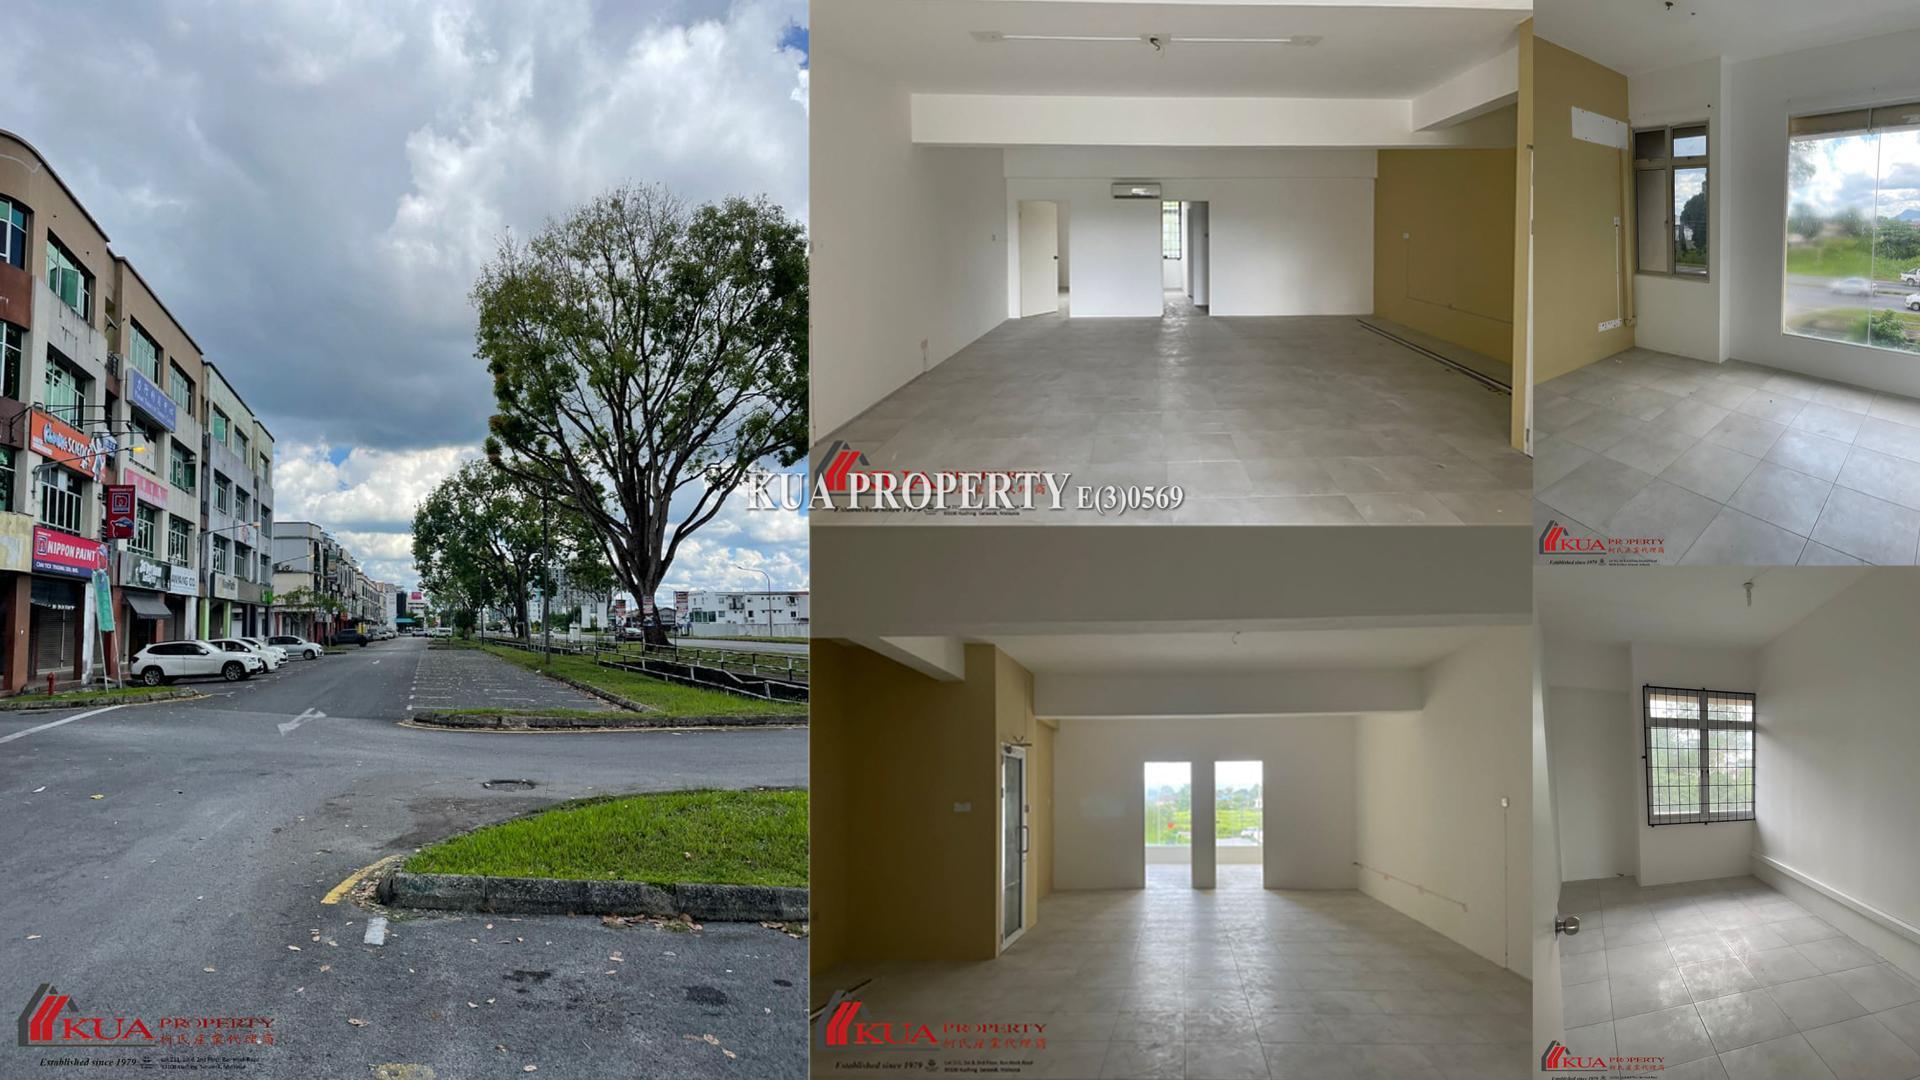 First Floor Shoplot/Office For Rent! Located at 3rd Mile, Jalan Tun Ahmad Zaidi Adruce